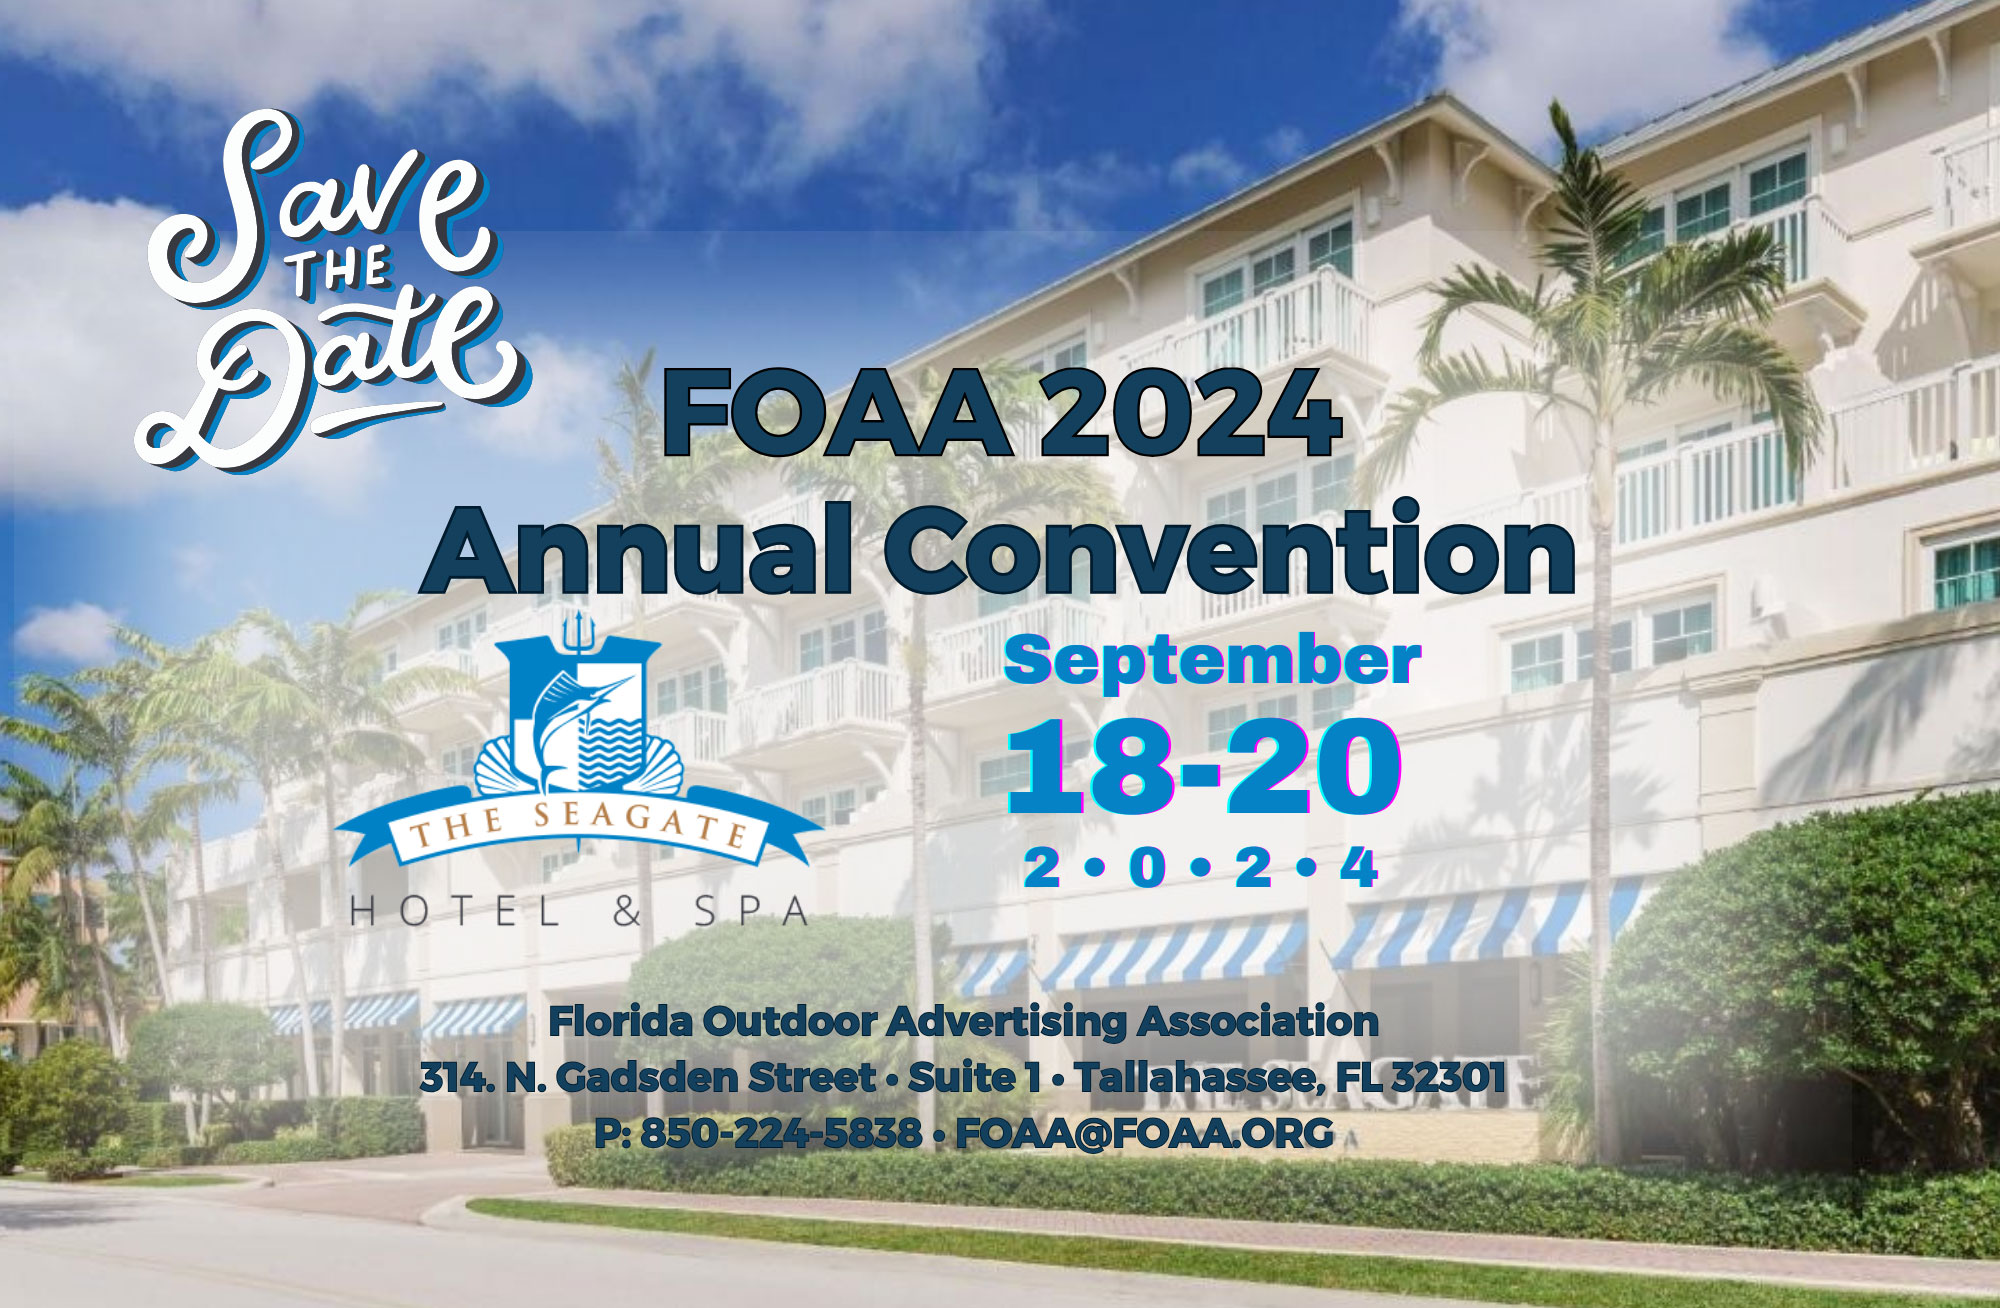 Save the Date: FOAA Annual Convention September 18-20, 2024